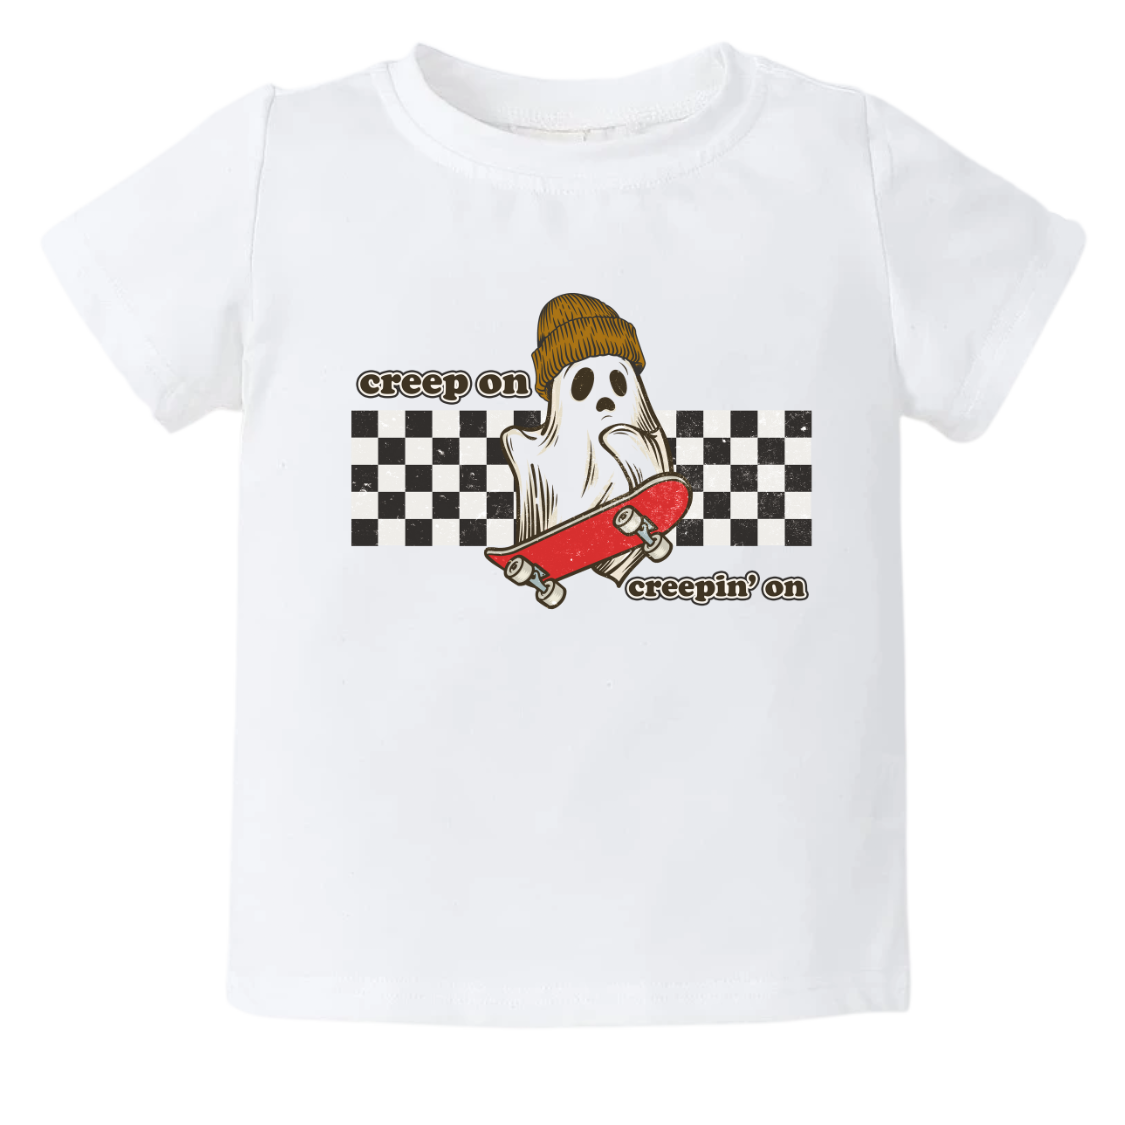 Kids' Halloween t-shirt with retro ghost boxing design.